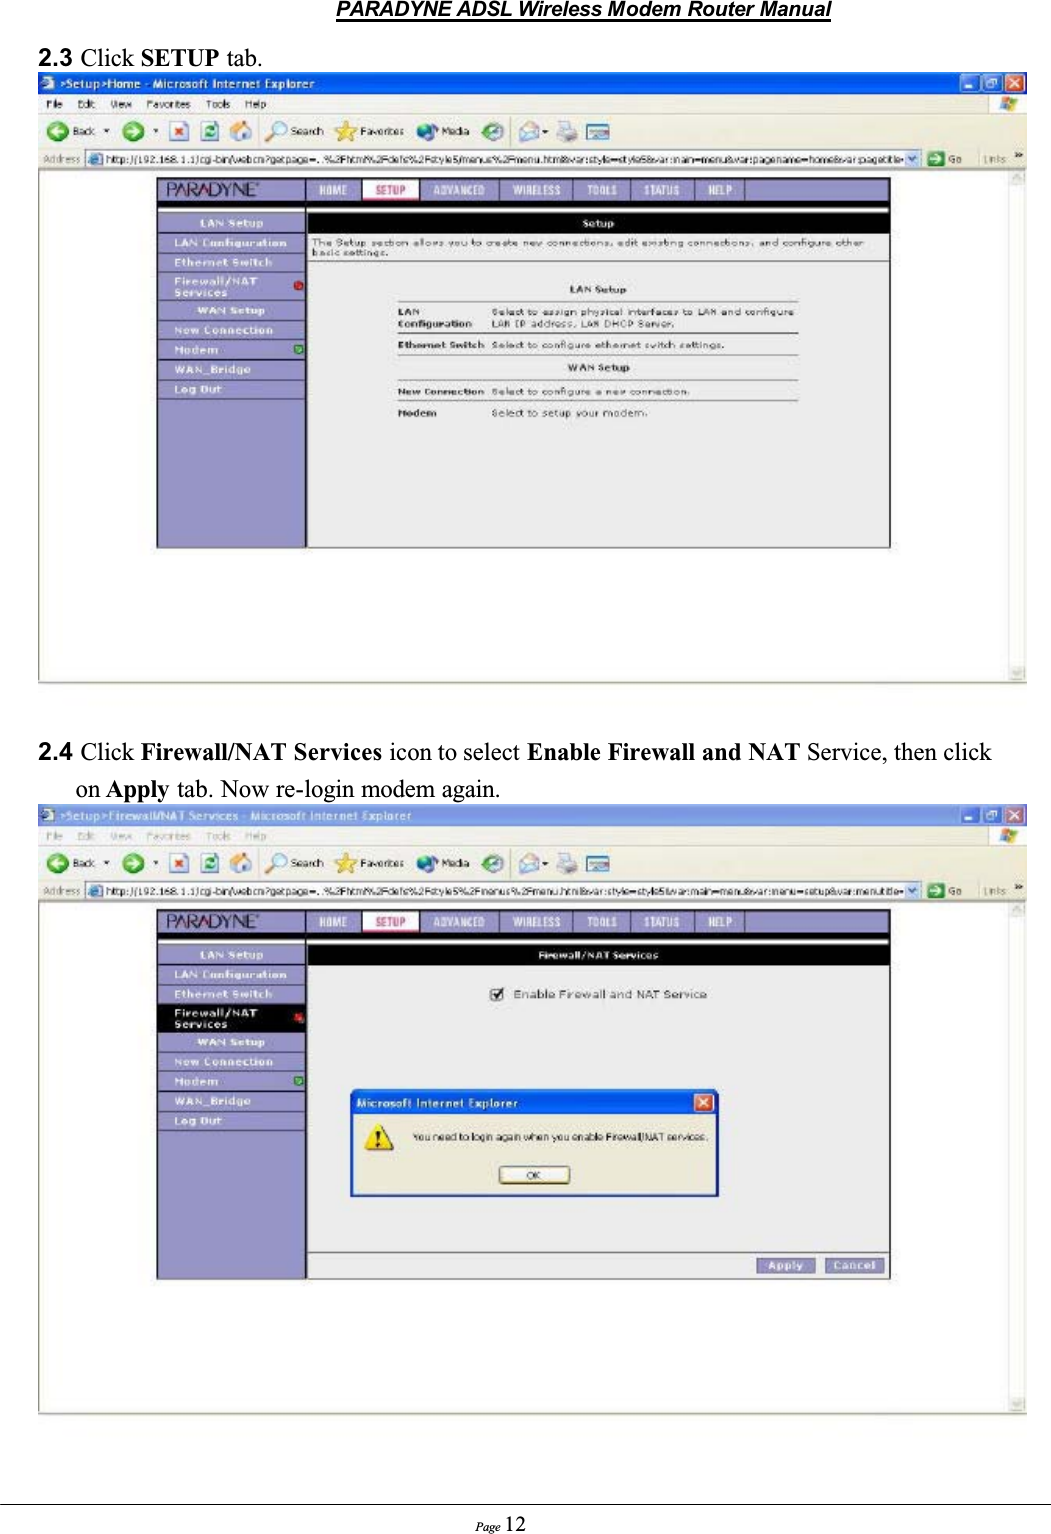 PARADYNE ADSL Wireless Modem Router ManualPage 122.3 Click SETUP tab.2.4 Click Firewall/NAT Services icon to select Enable Firewall and NAT Service, then click on Apply tab. Now re-login modem again.